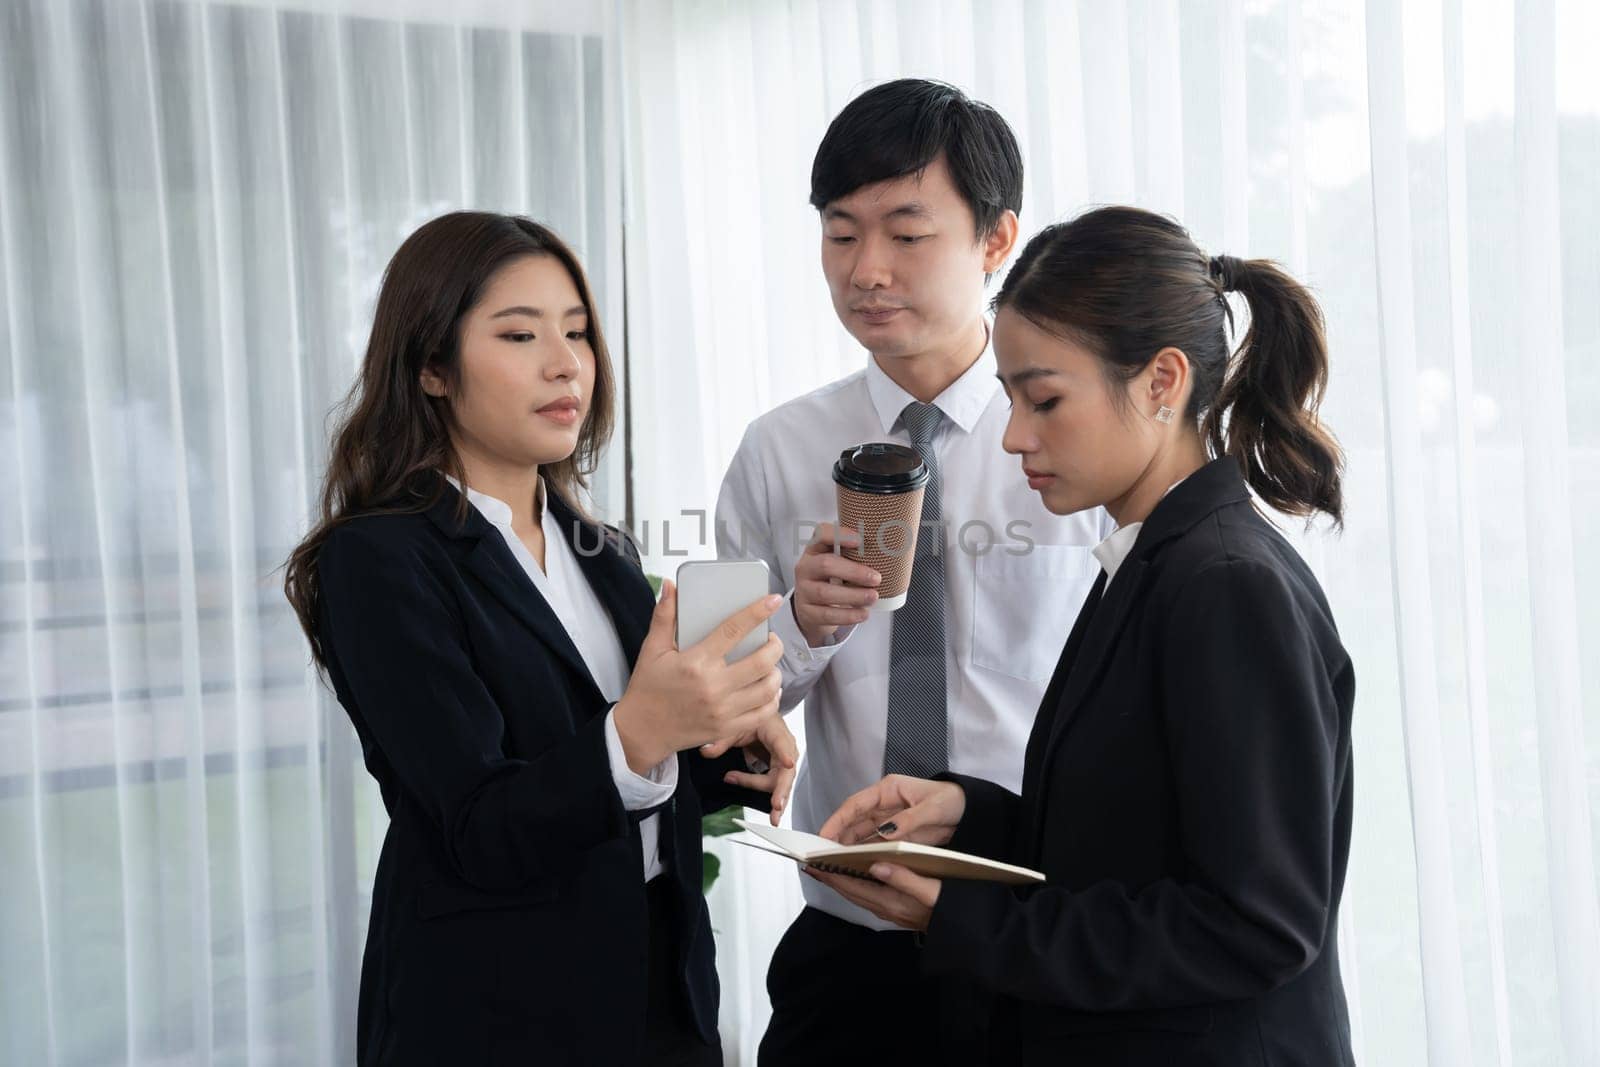 Mentor, manager with coffee advice younger colleagues in workplace. Businesspeople discussing or planning financial project strategy, talking together for harmony and strong teamwork in office concept